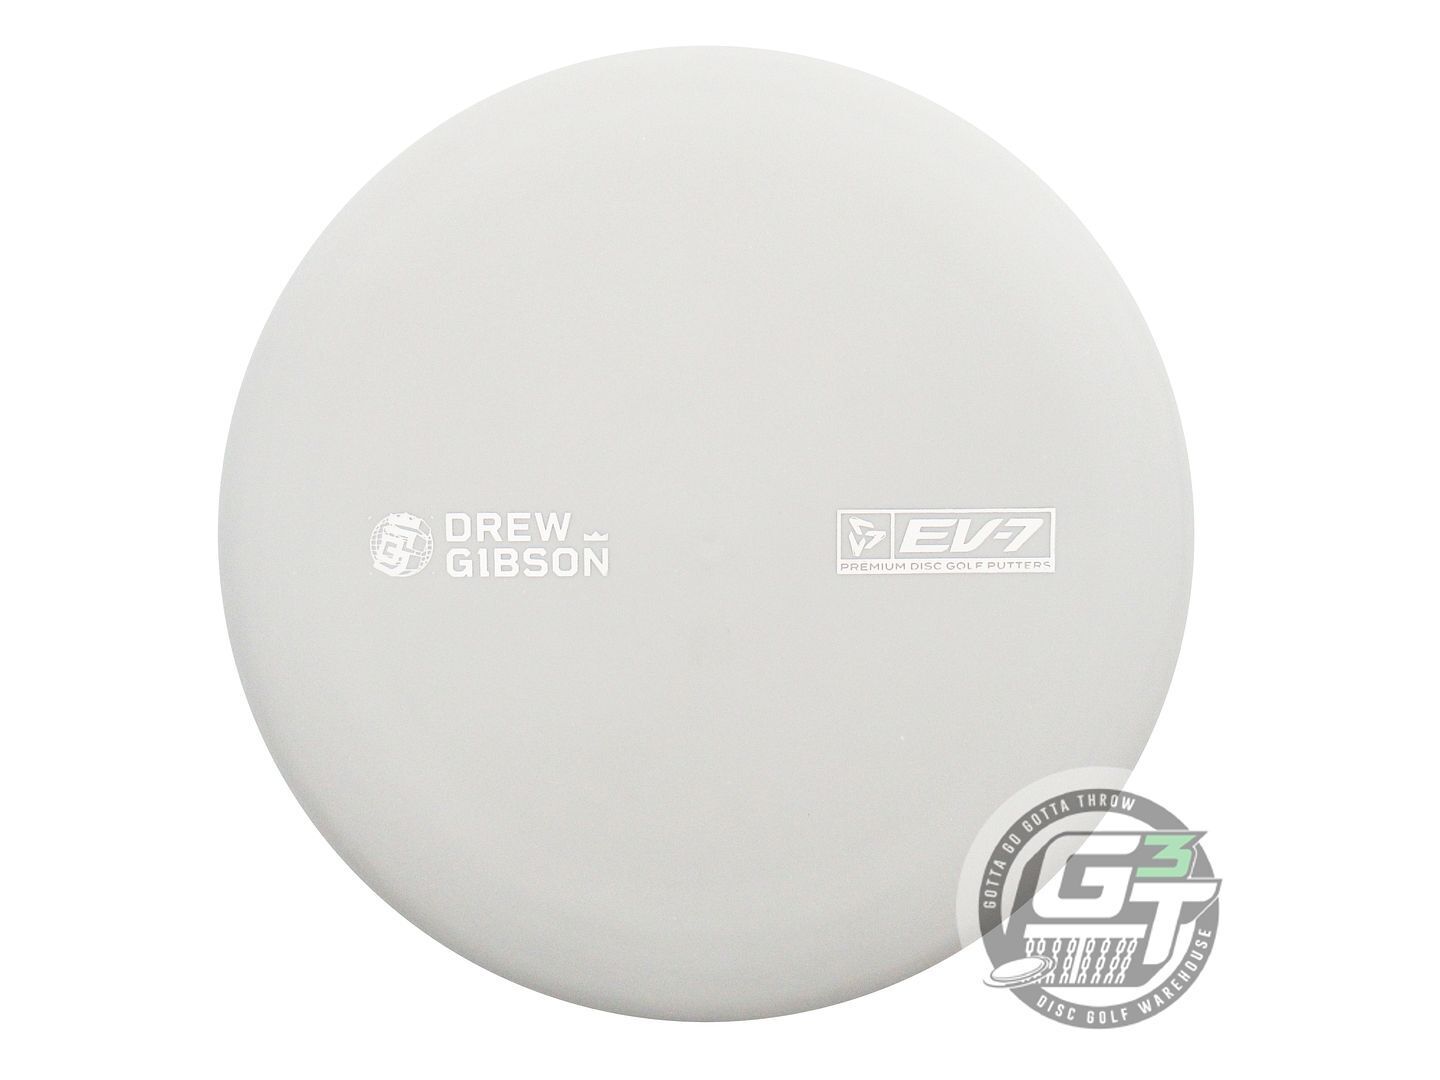 EV-7 Limited Edition 2021 Tour Series Drew Gibson OG Firm Penrose Putter Golf Disc (Individually Listed)